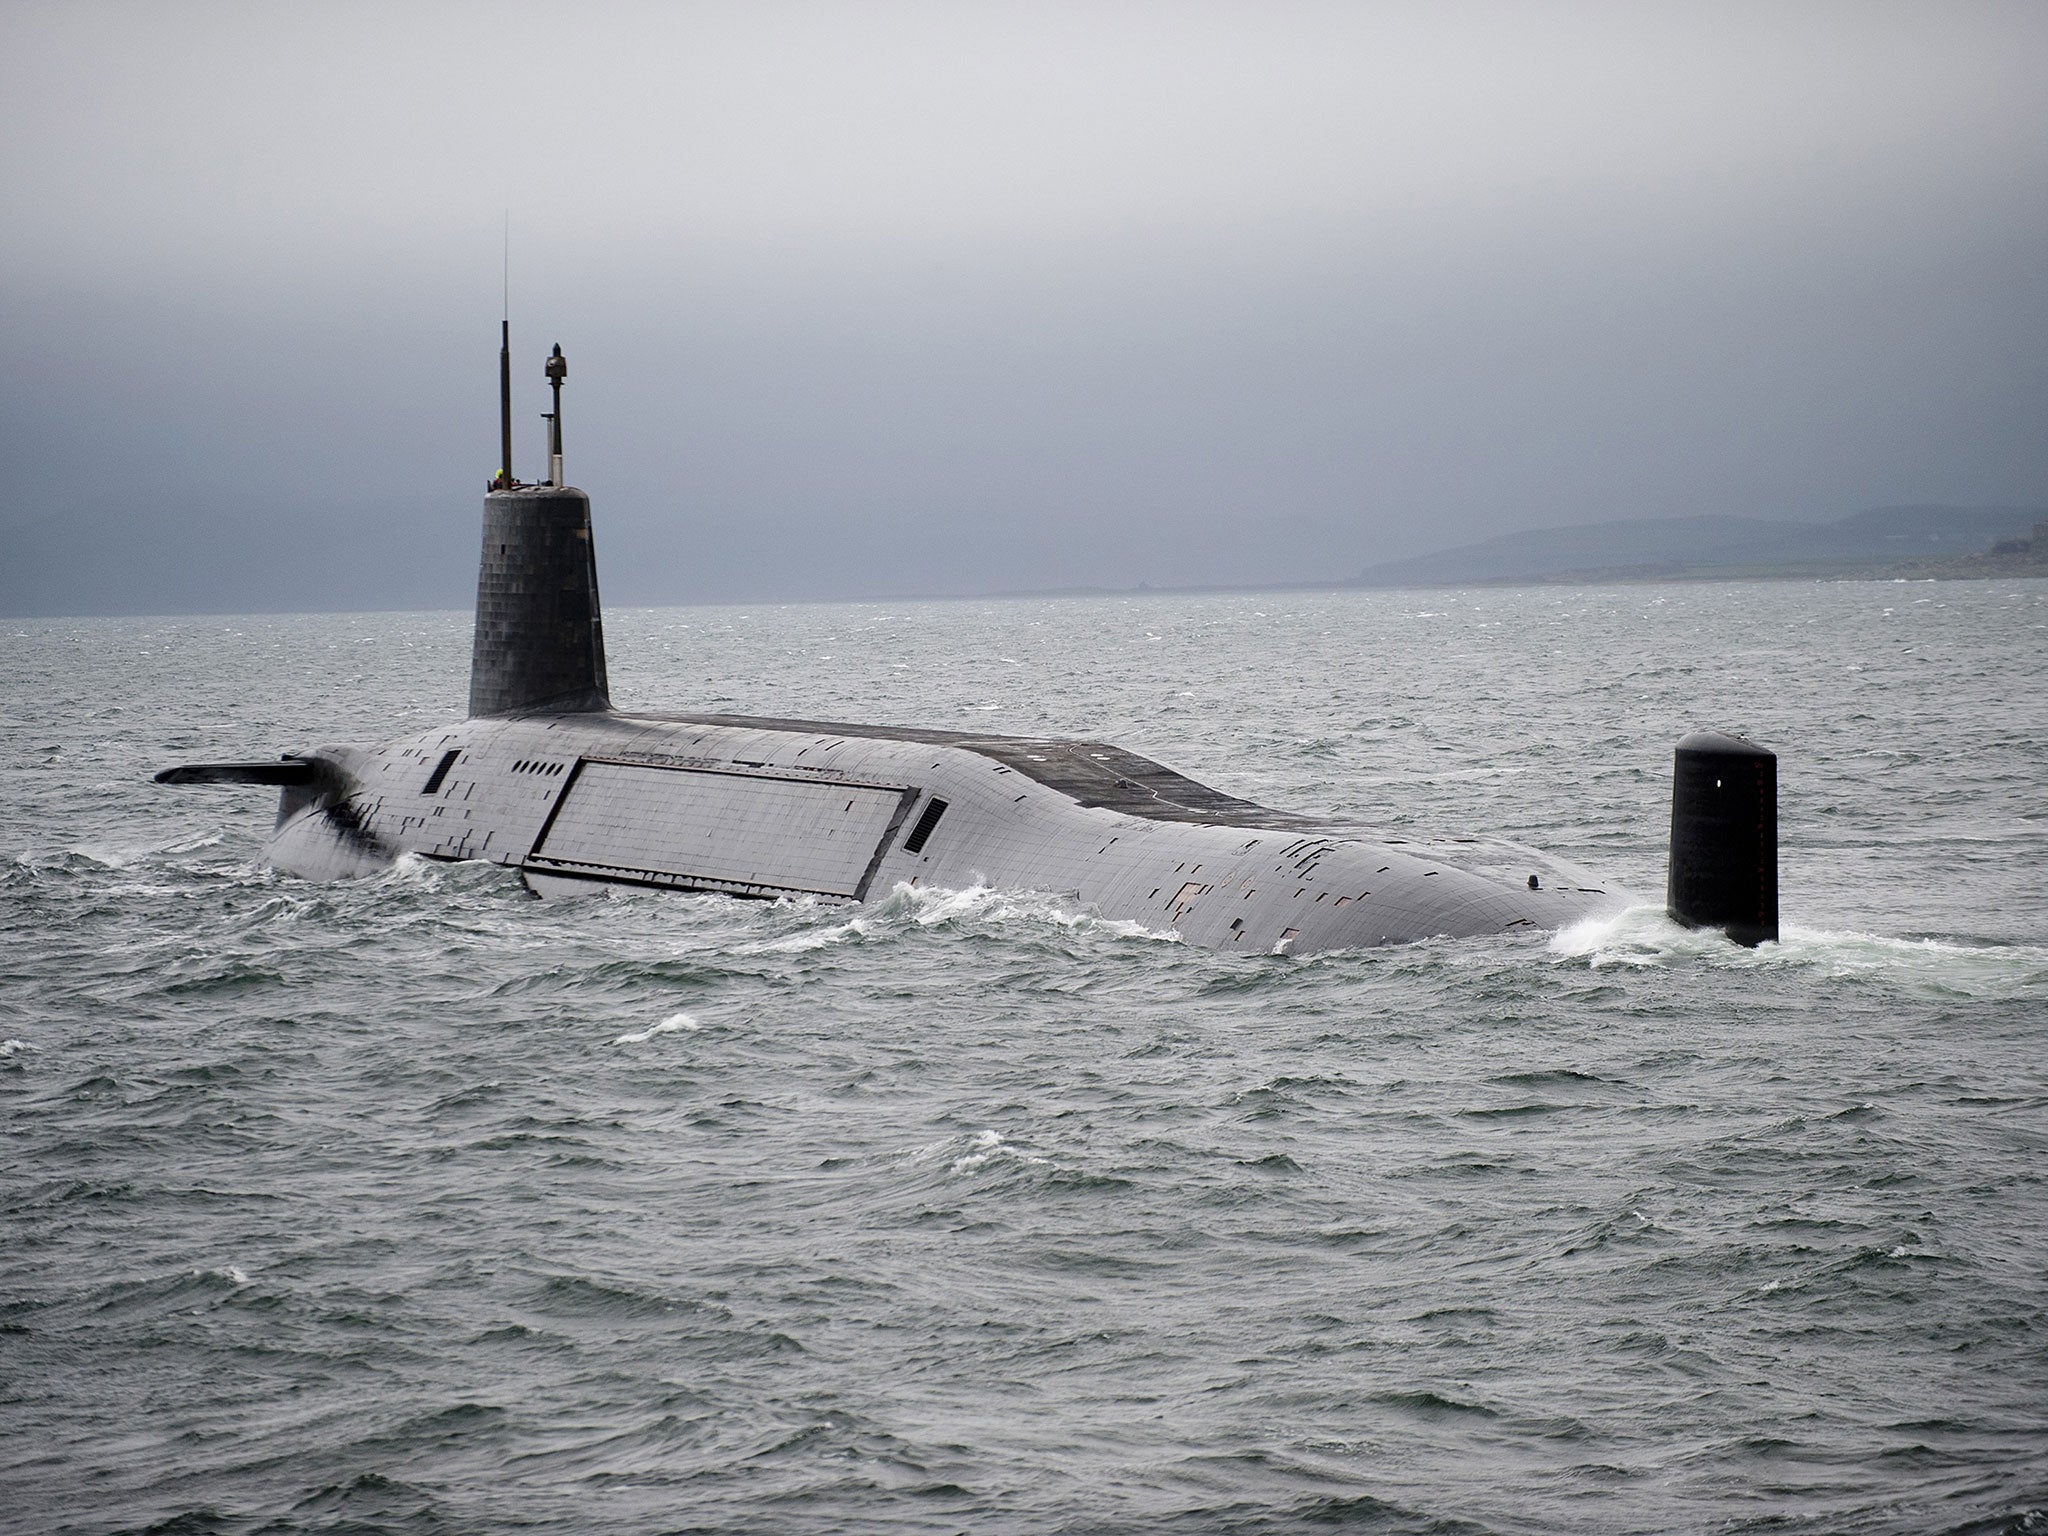 File: In this handout image provided by the MoD, HMS Vengeance departs for Devonport prior to re-fit on Ferbruary 27, 2012 off the coast of Largs, Scotland